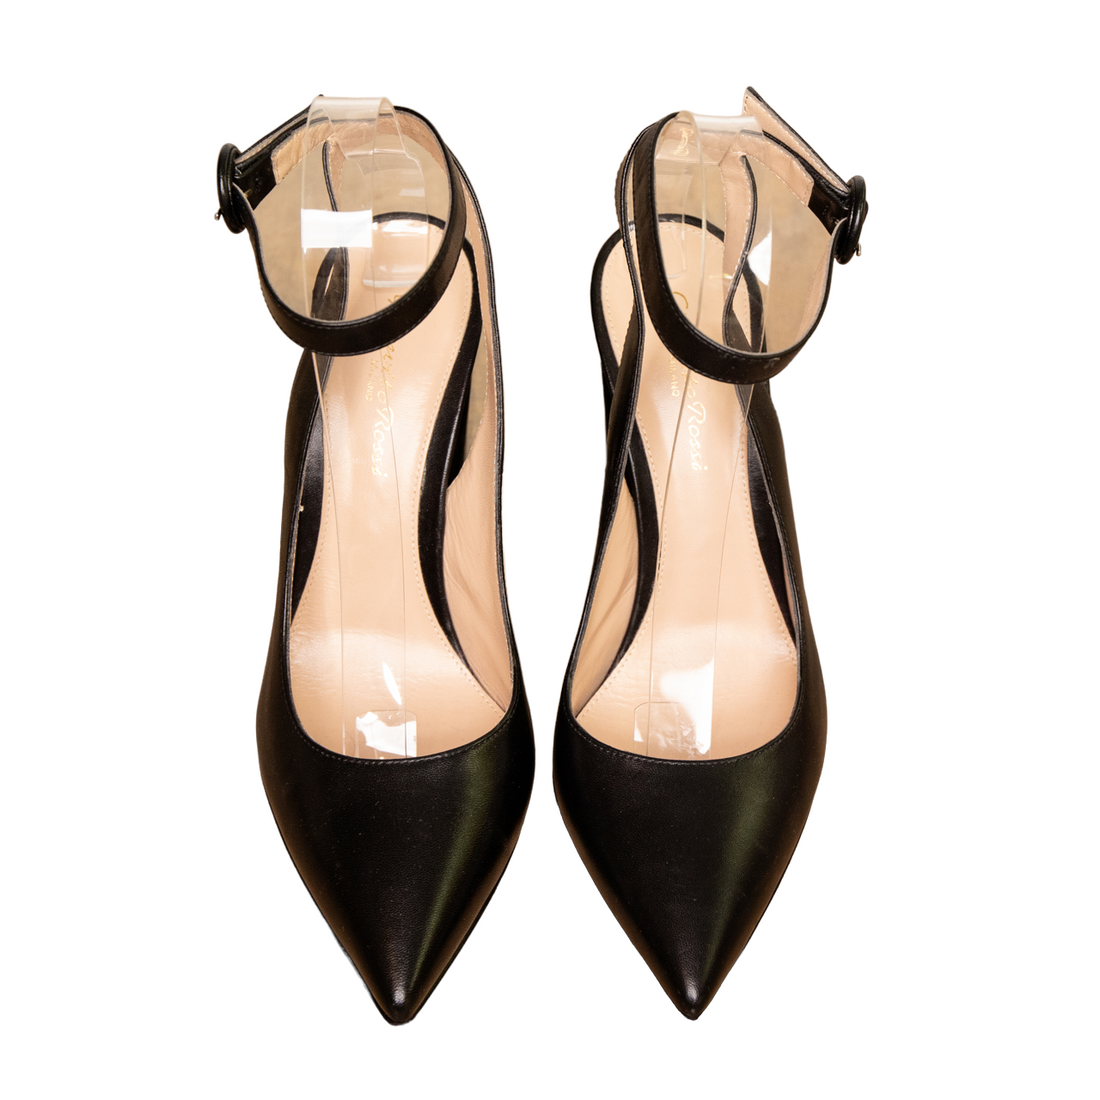 Gianvito Rossi pointed sling pumps with block heel